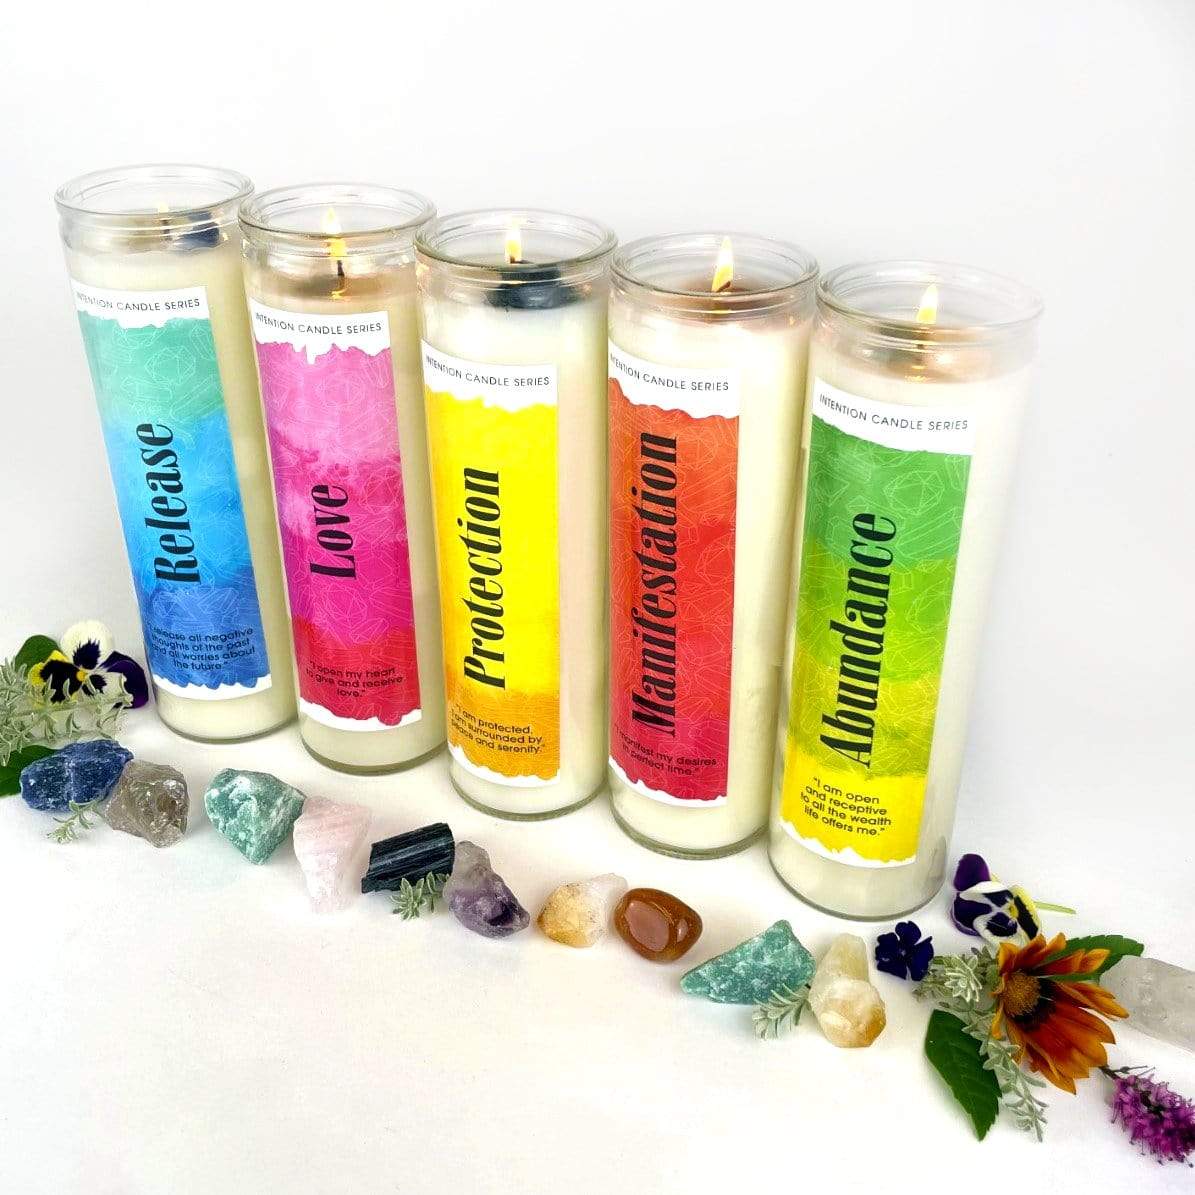 5 intention candles displayed with crystals and flowers.